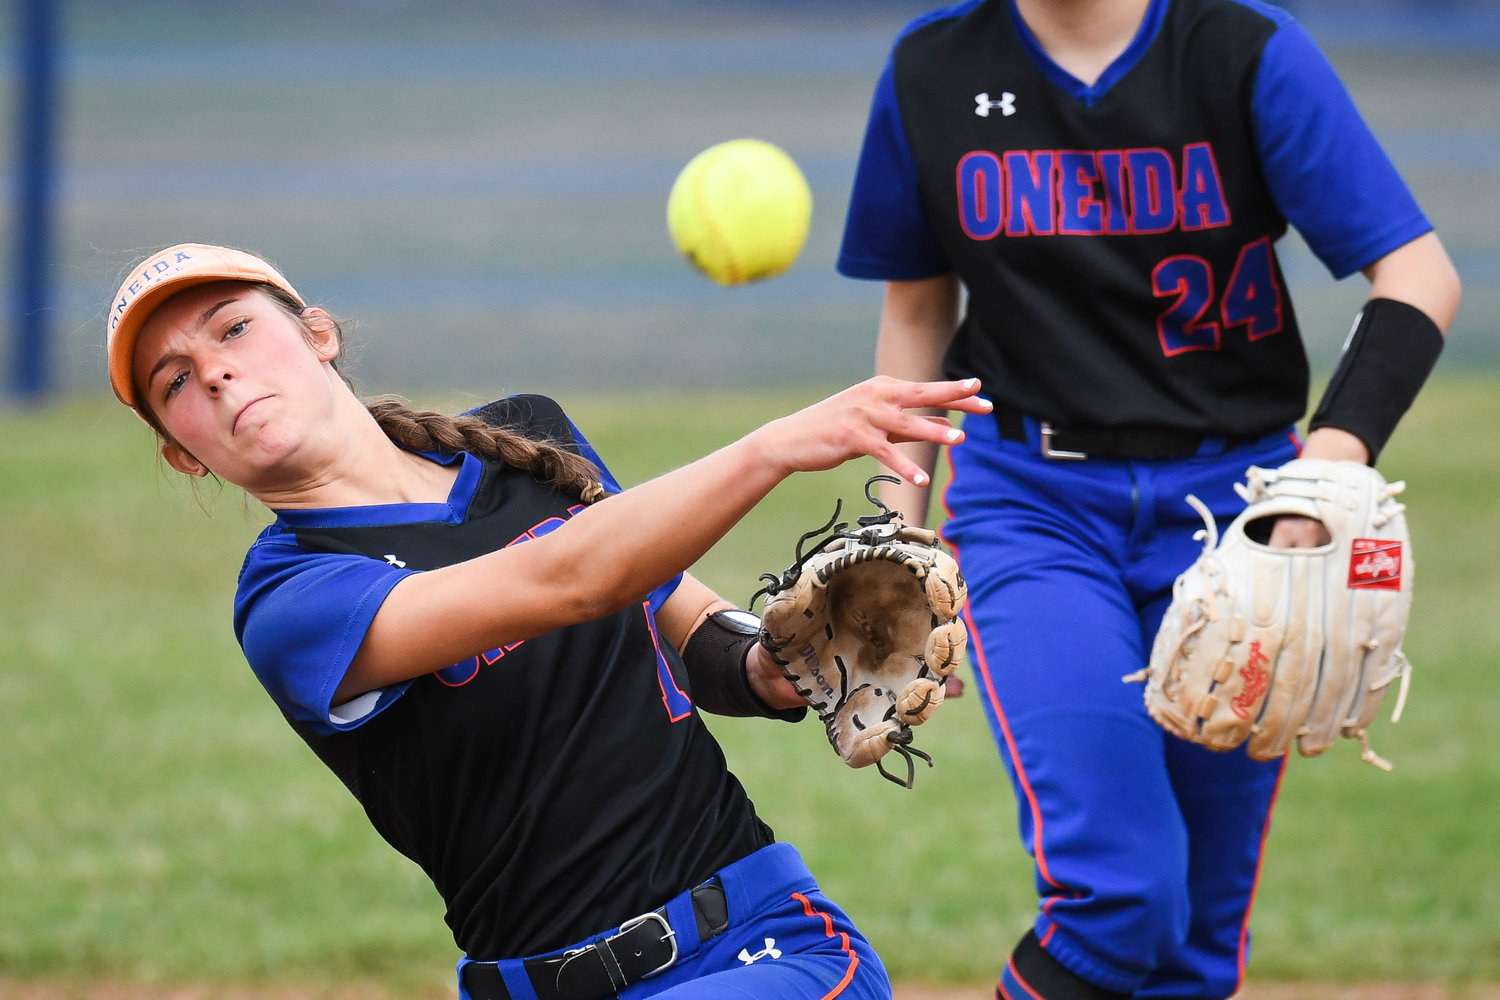 FIRING TO FIRST — Oneida senior shortstop Kaylin Curro throws the ball to first base during the game against Notre Dame on Wednesday. Oneida won 5-1 then beat Cicero-North Syracuse 5-3 at home the next day.